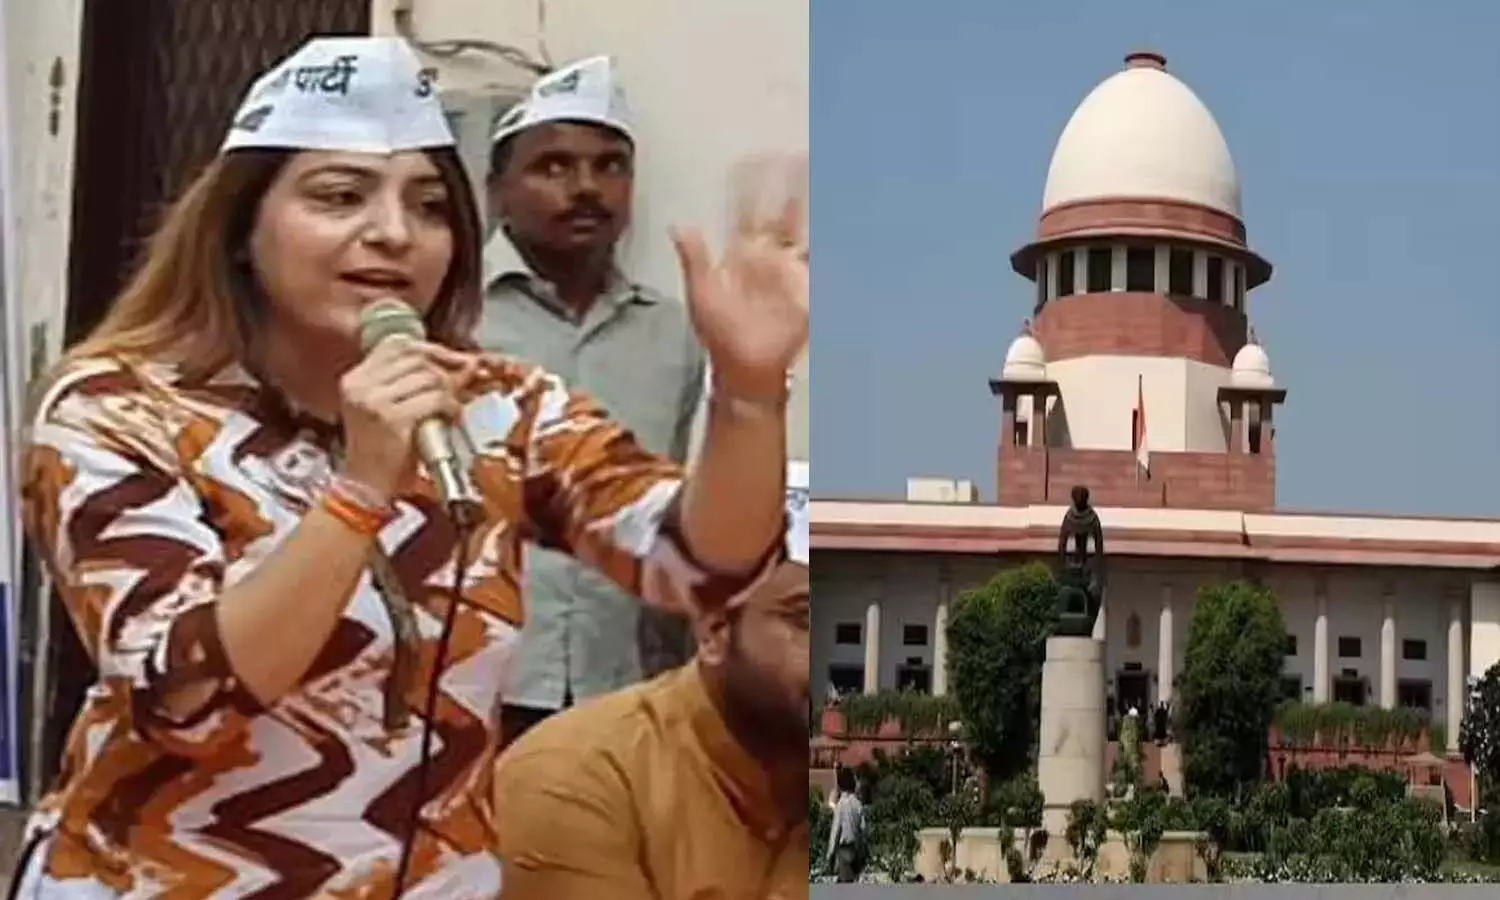 AAP candidate Shelli Oberoi filed a petition in the Supreme Court regarding the election for the post of Delhi Mayor.